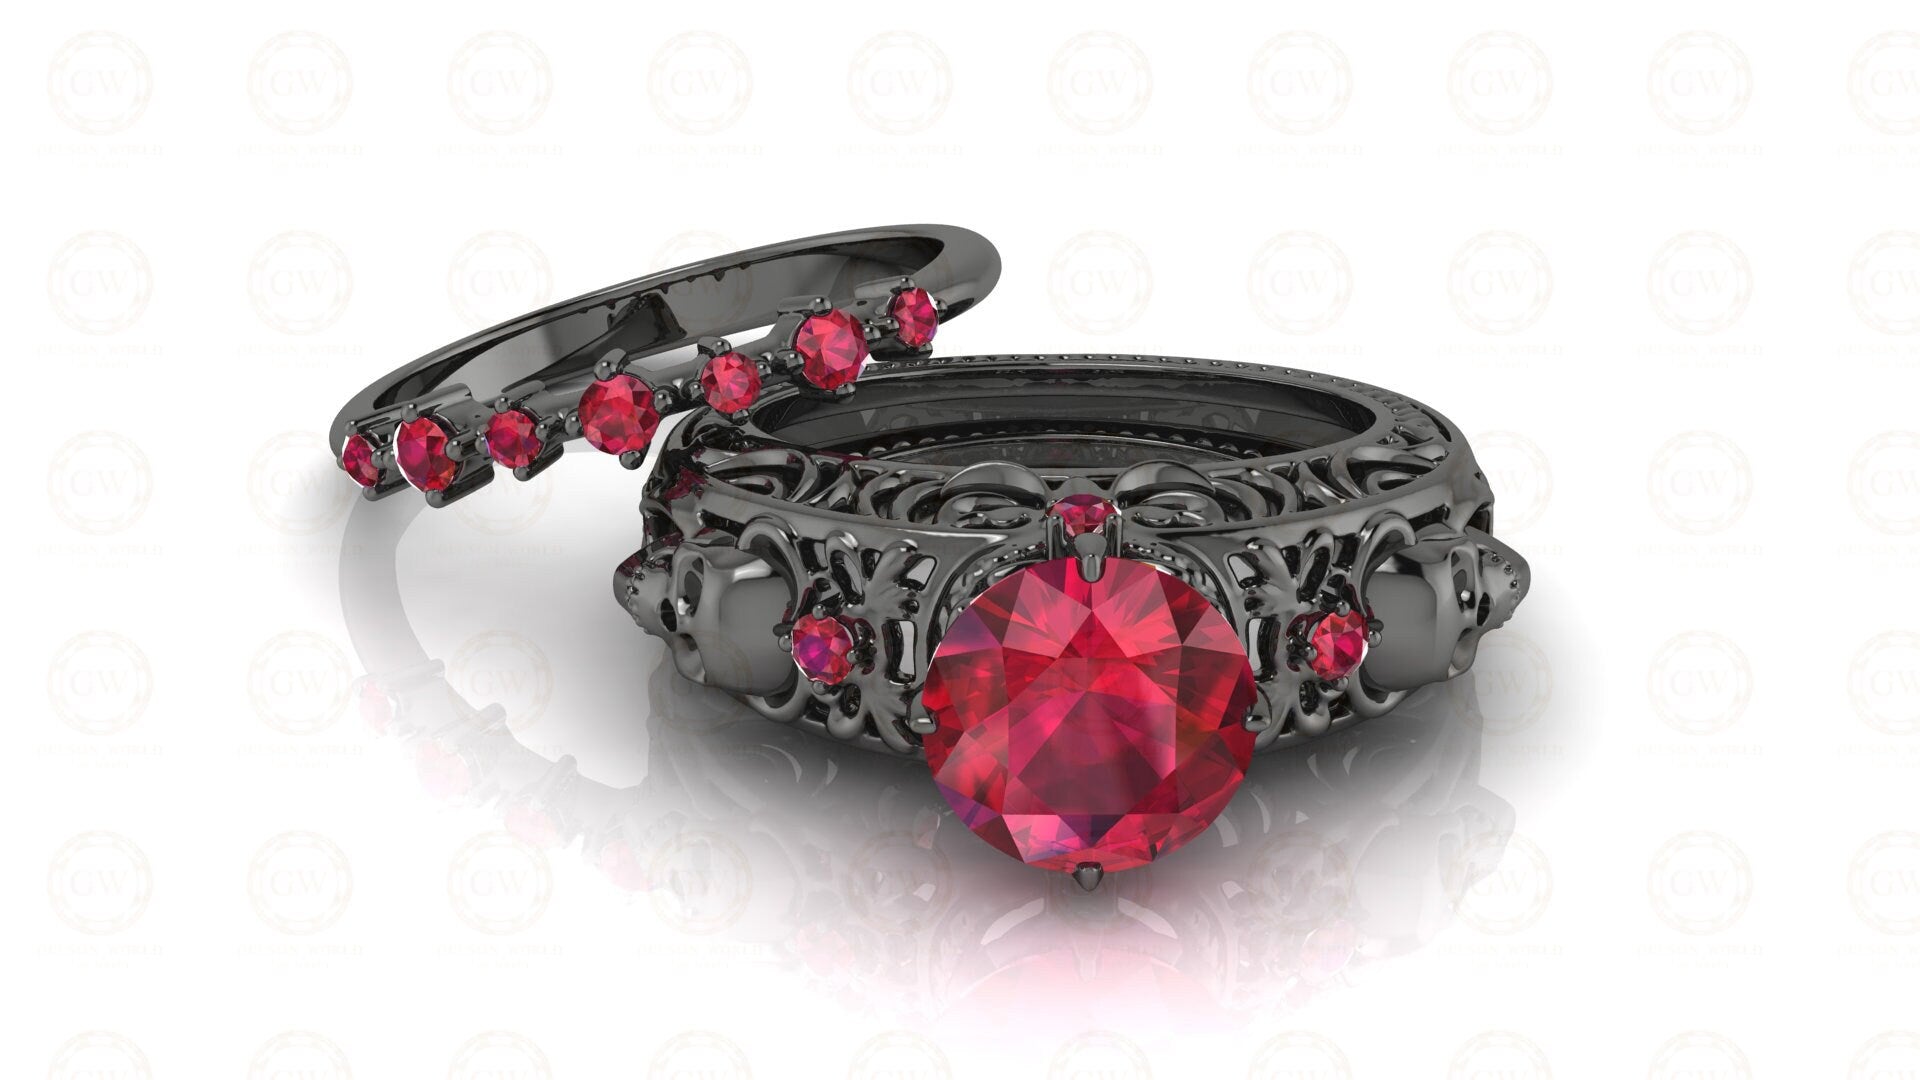 2.15 Ct Unique Gothic Skull Round Floral Vintage Bridal Engagement Ring Set, Birthstone July Ruby gemstone ring, Matching Band, Women Ring